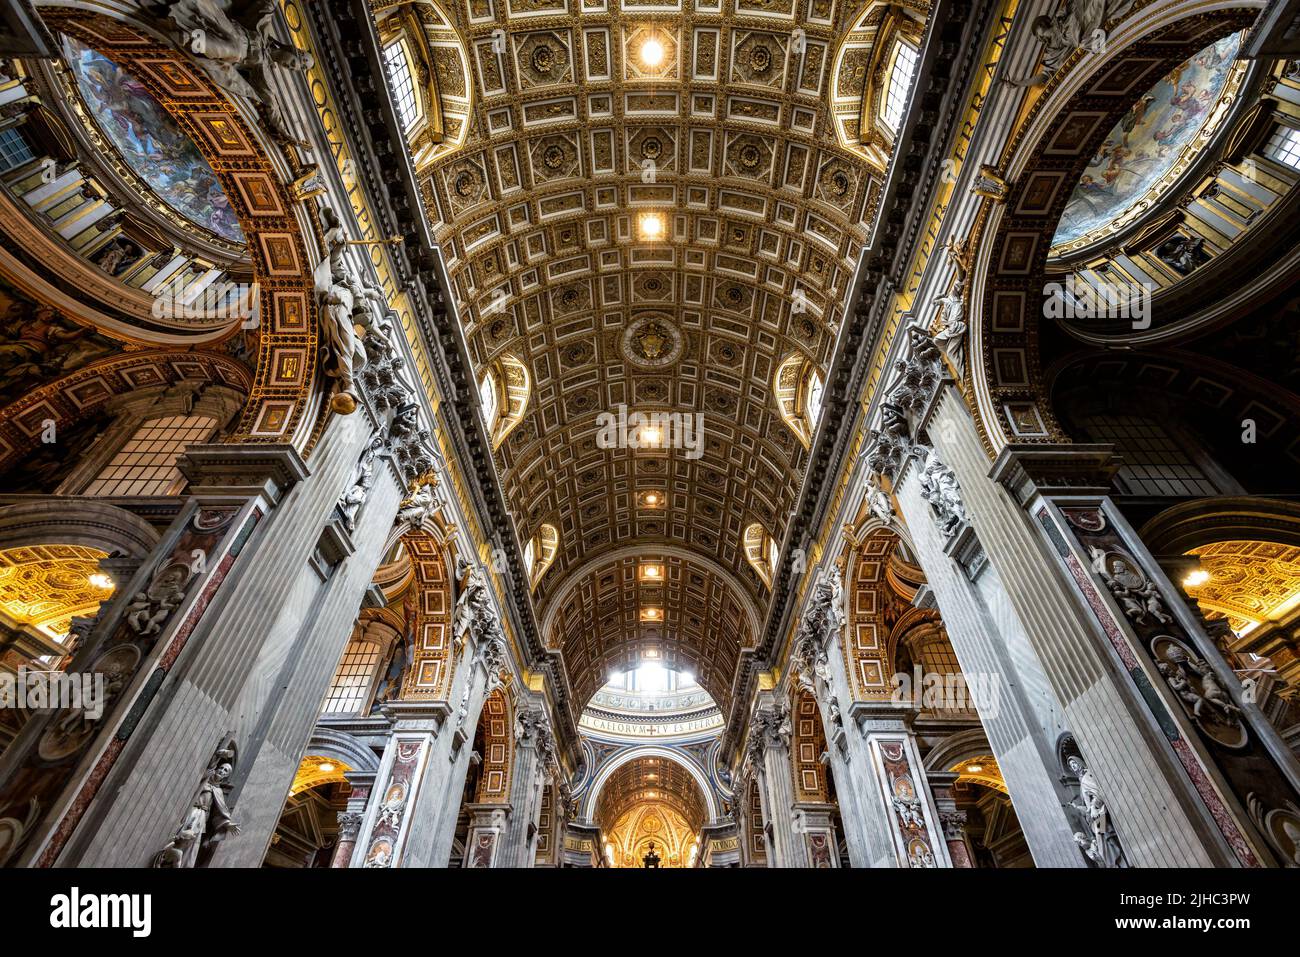 Rome - Jun 12, 2021: Inside St Peter Basilica, Rome, Italy. Saint Peters cathedral is top landmark of Rome and Vatican City. Ornate Baroque interior o Stock Photo